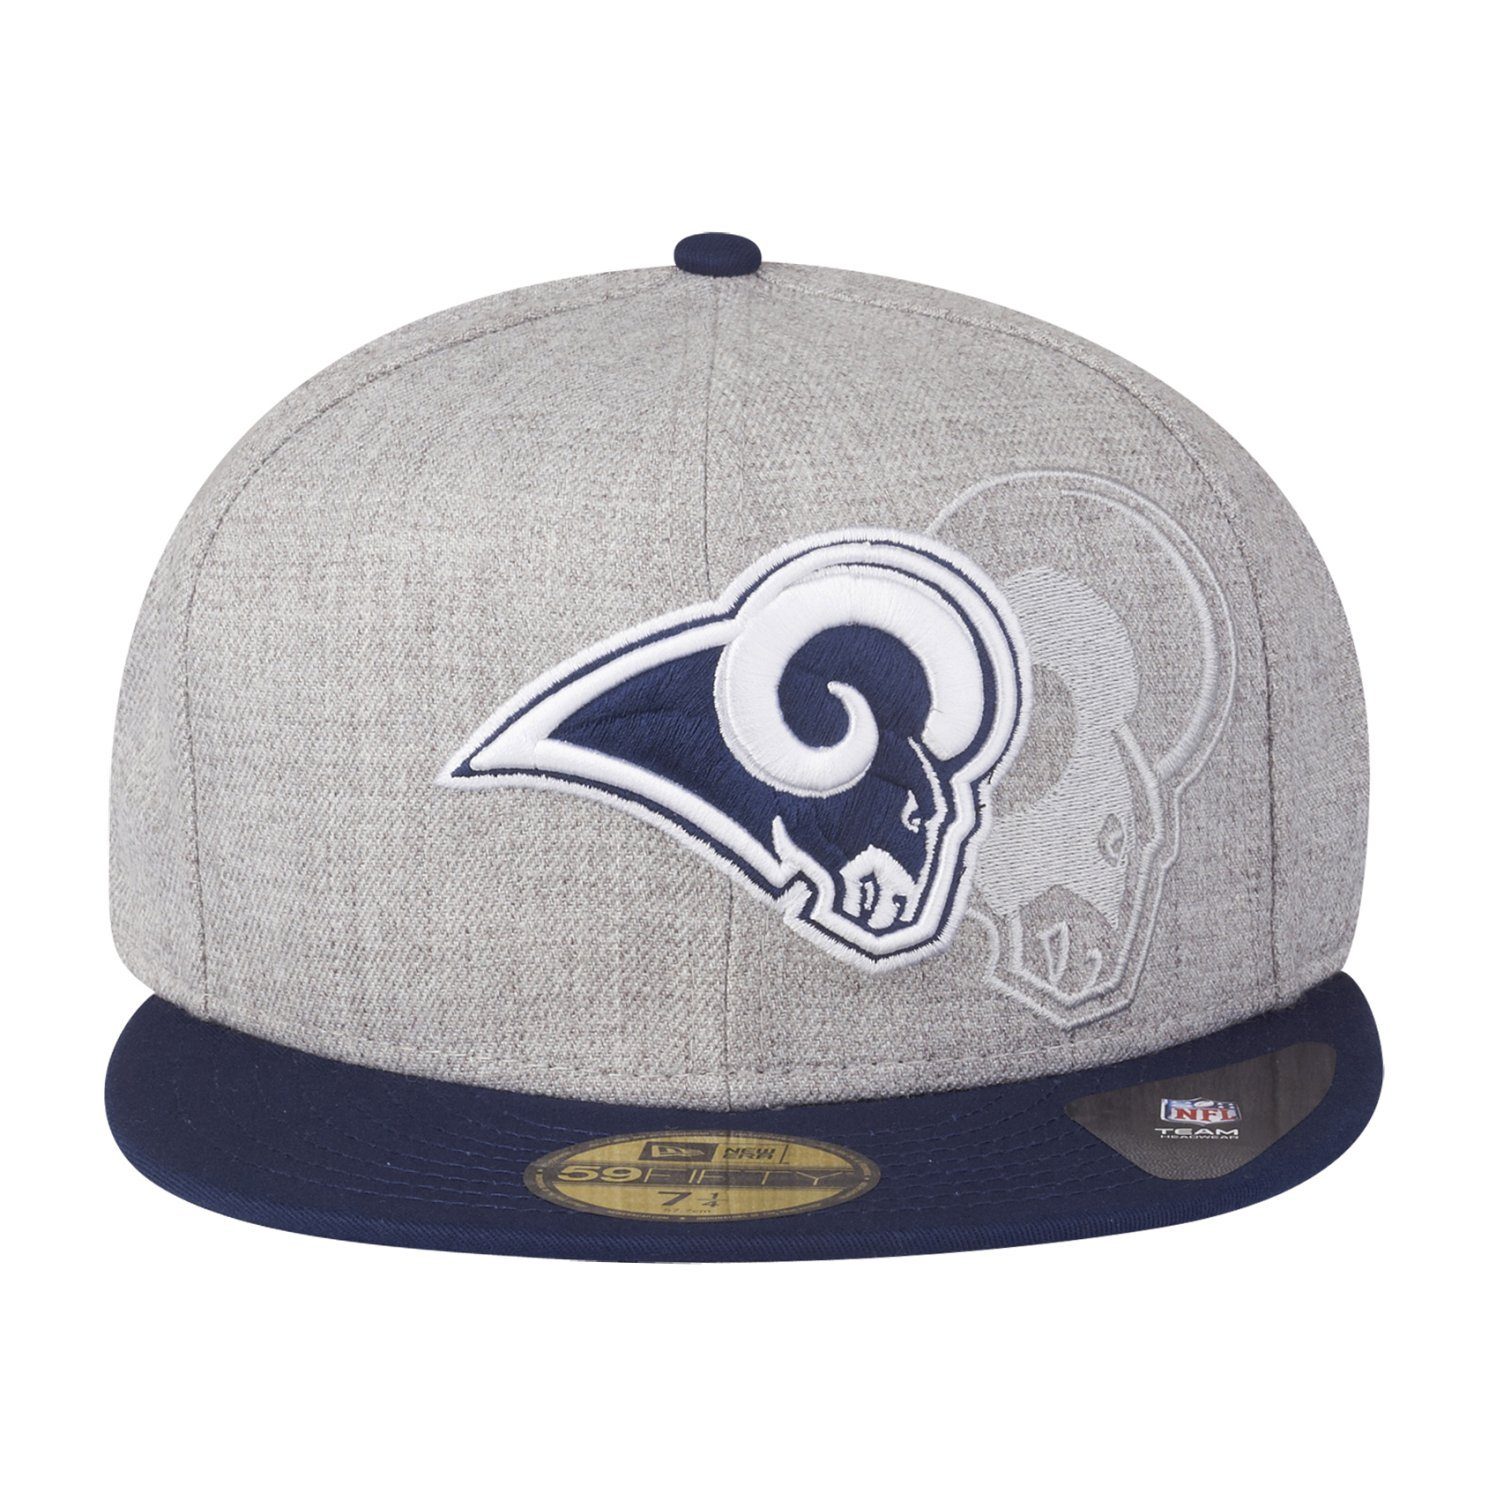 New Cap 59Fifty Era SCREENING Angeles Fitted Los Rams NFL